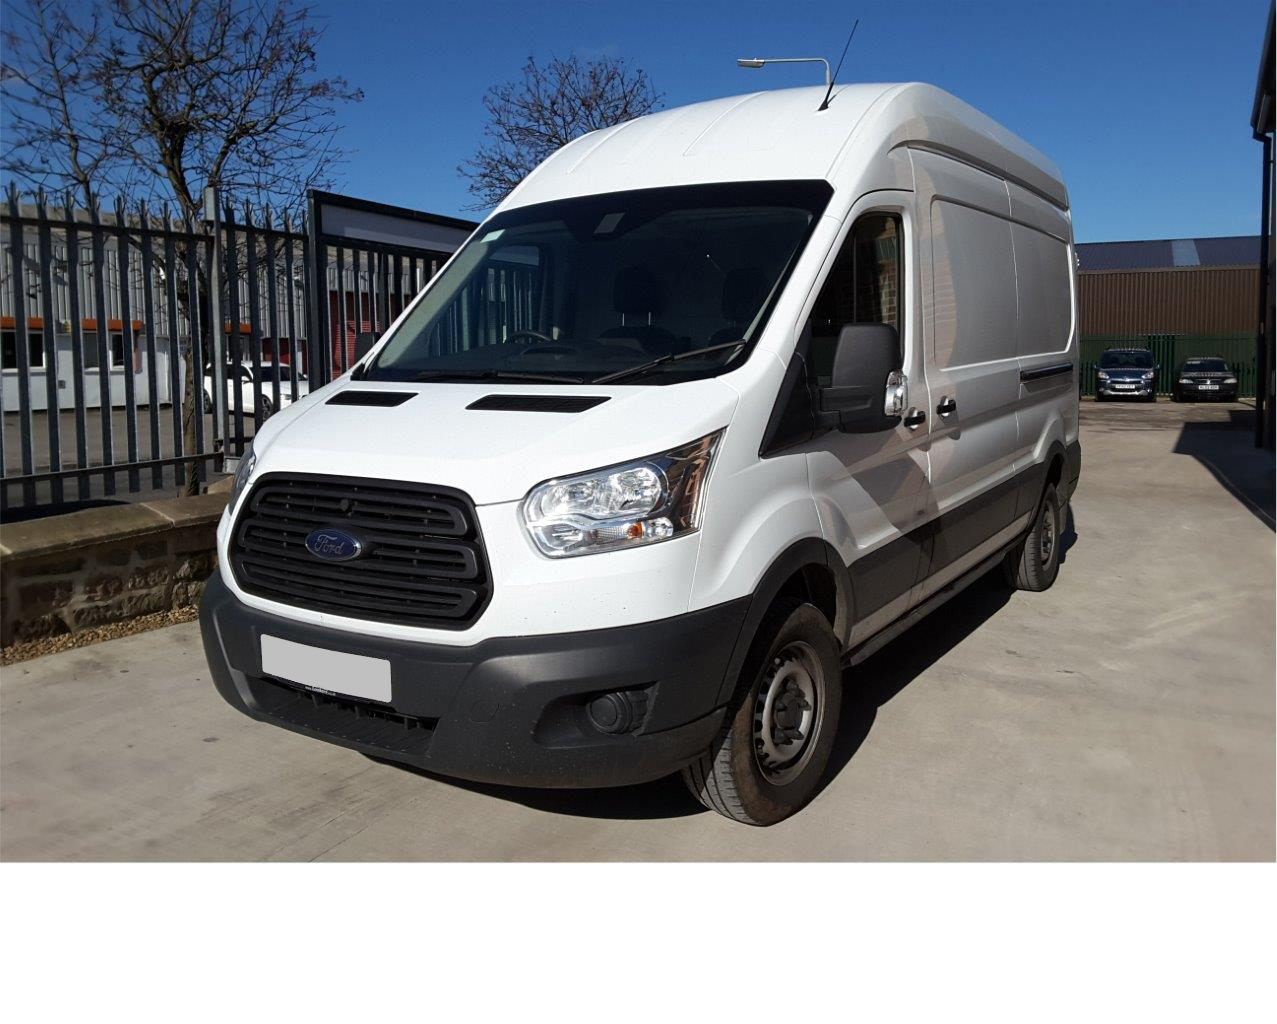 Extra large vans for hire in Worksop